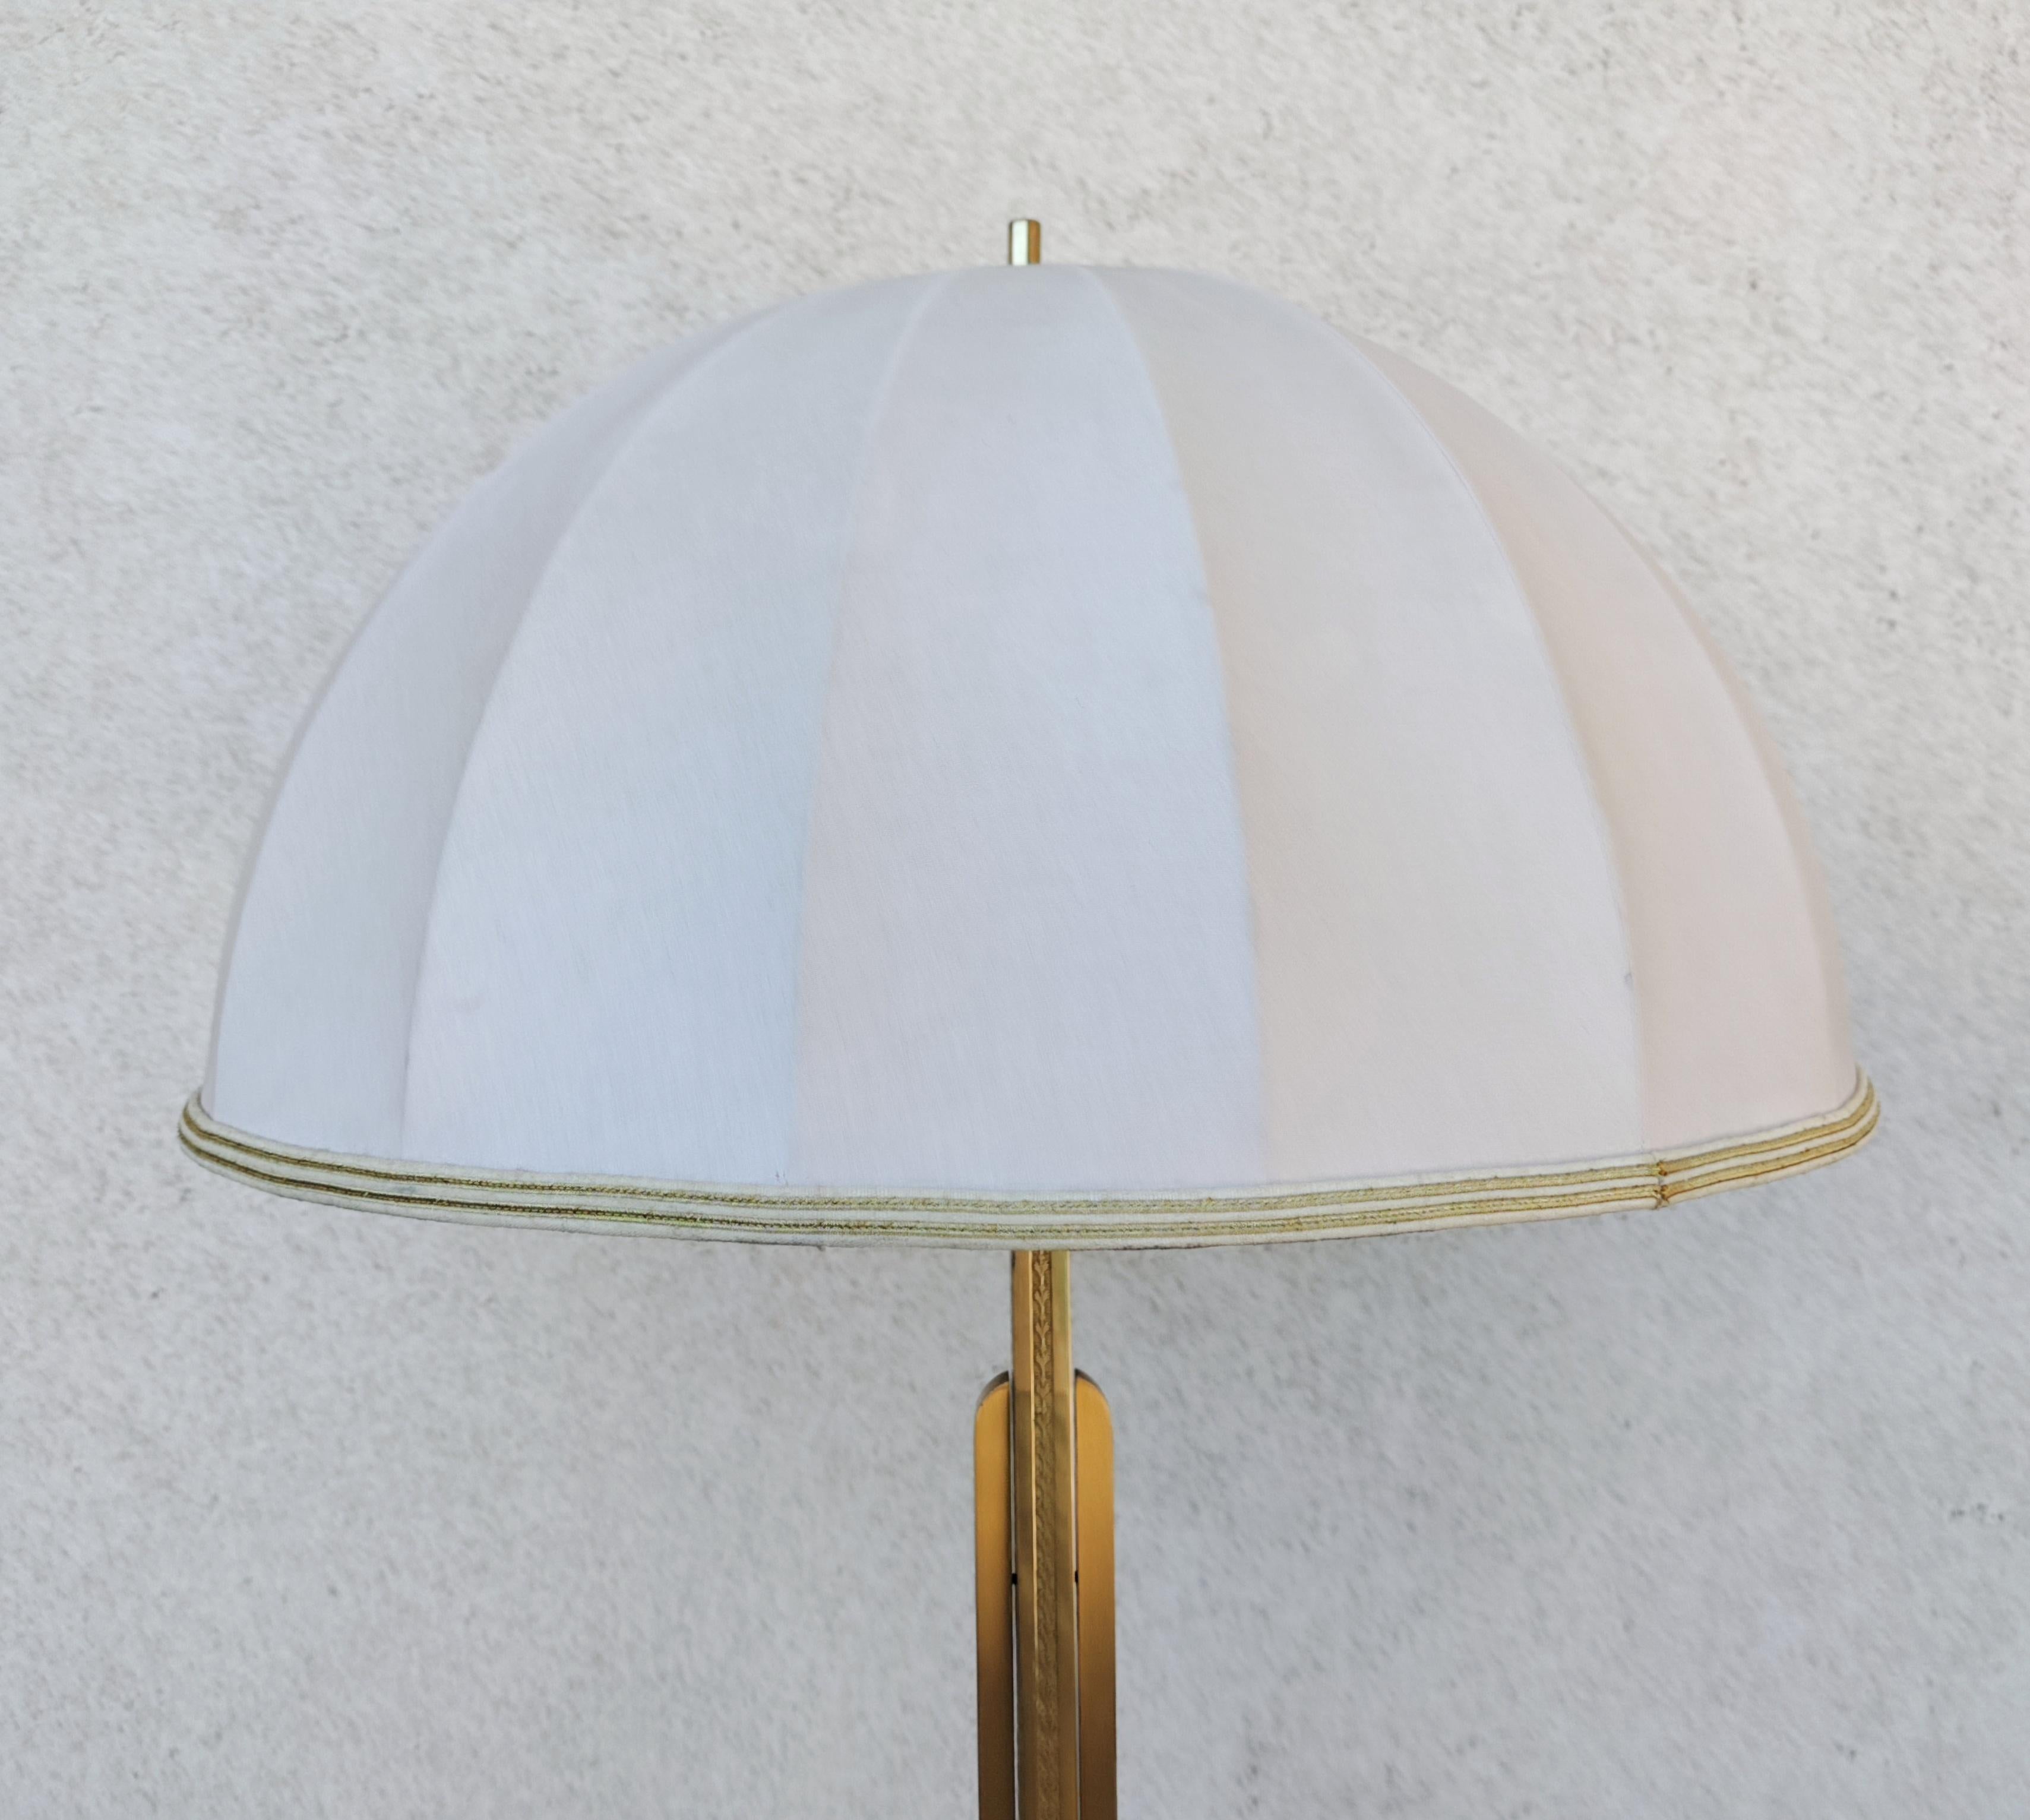 Mid-20th Century Hollywood Regency Brass Floor Lamp by Schroder and Co., West Germany 1950s For Sale